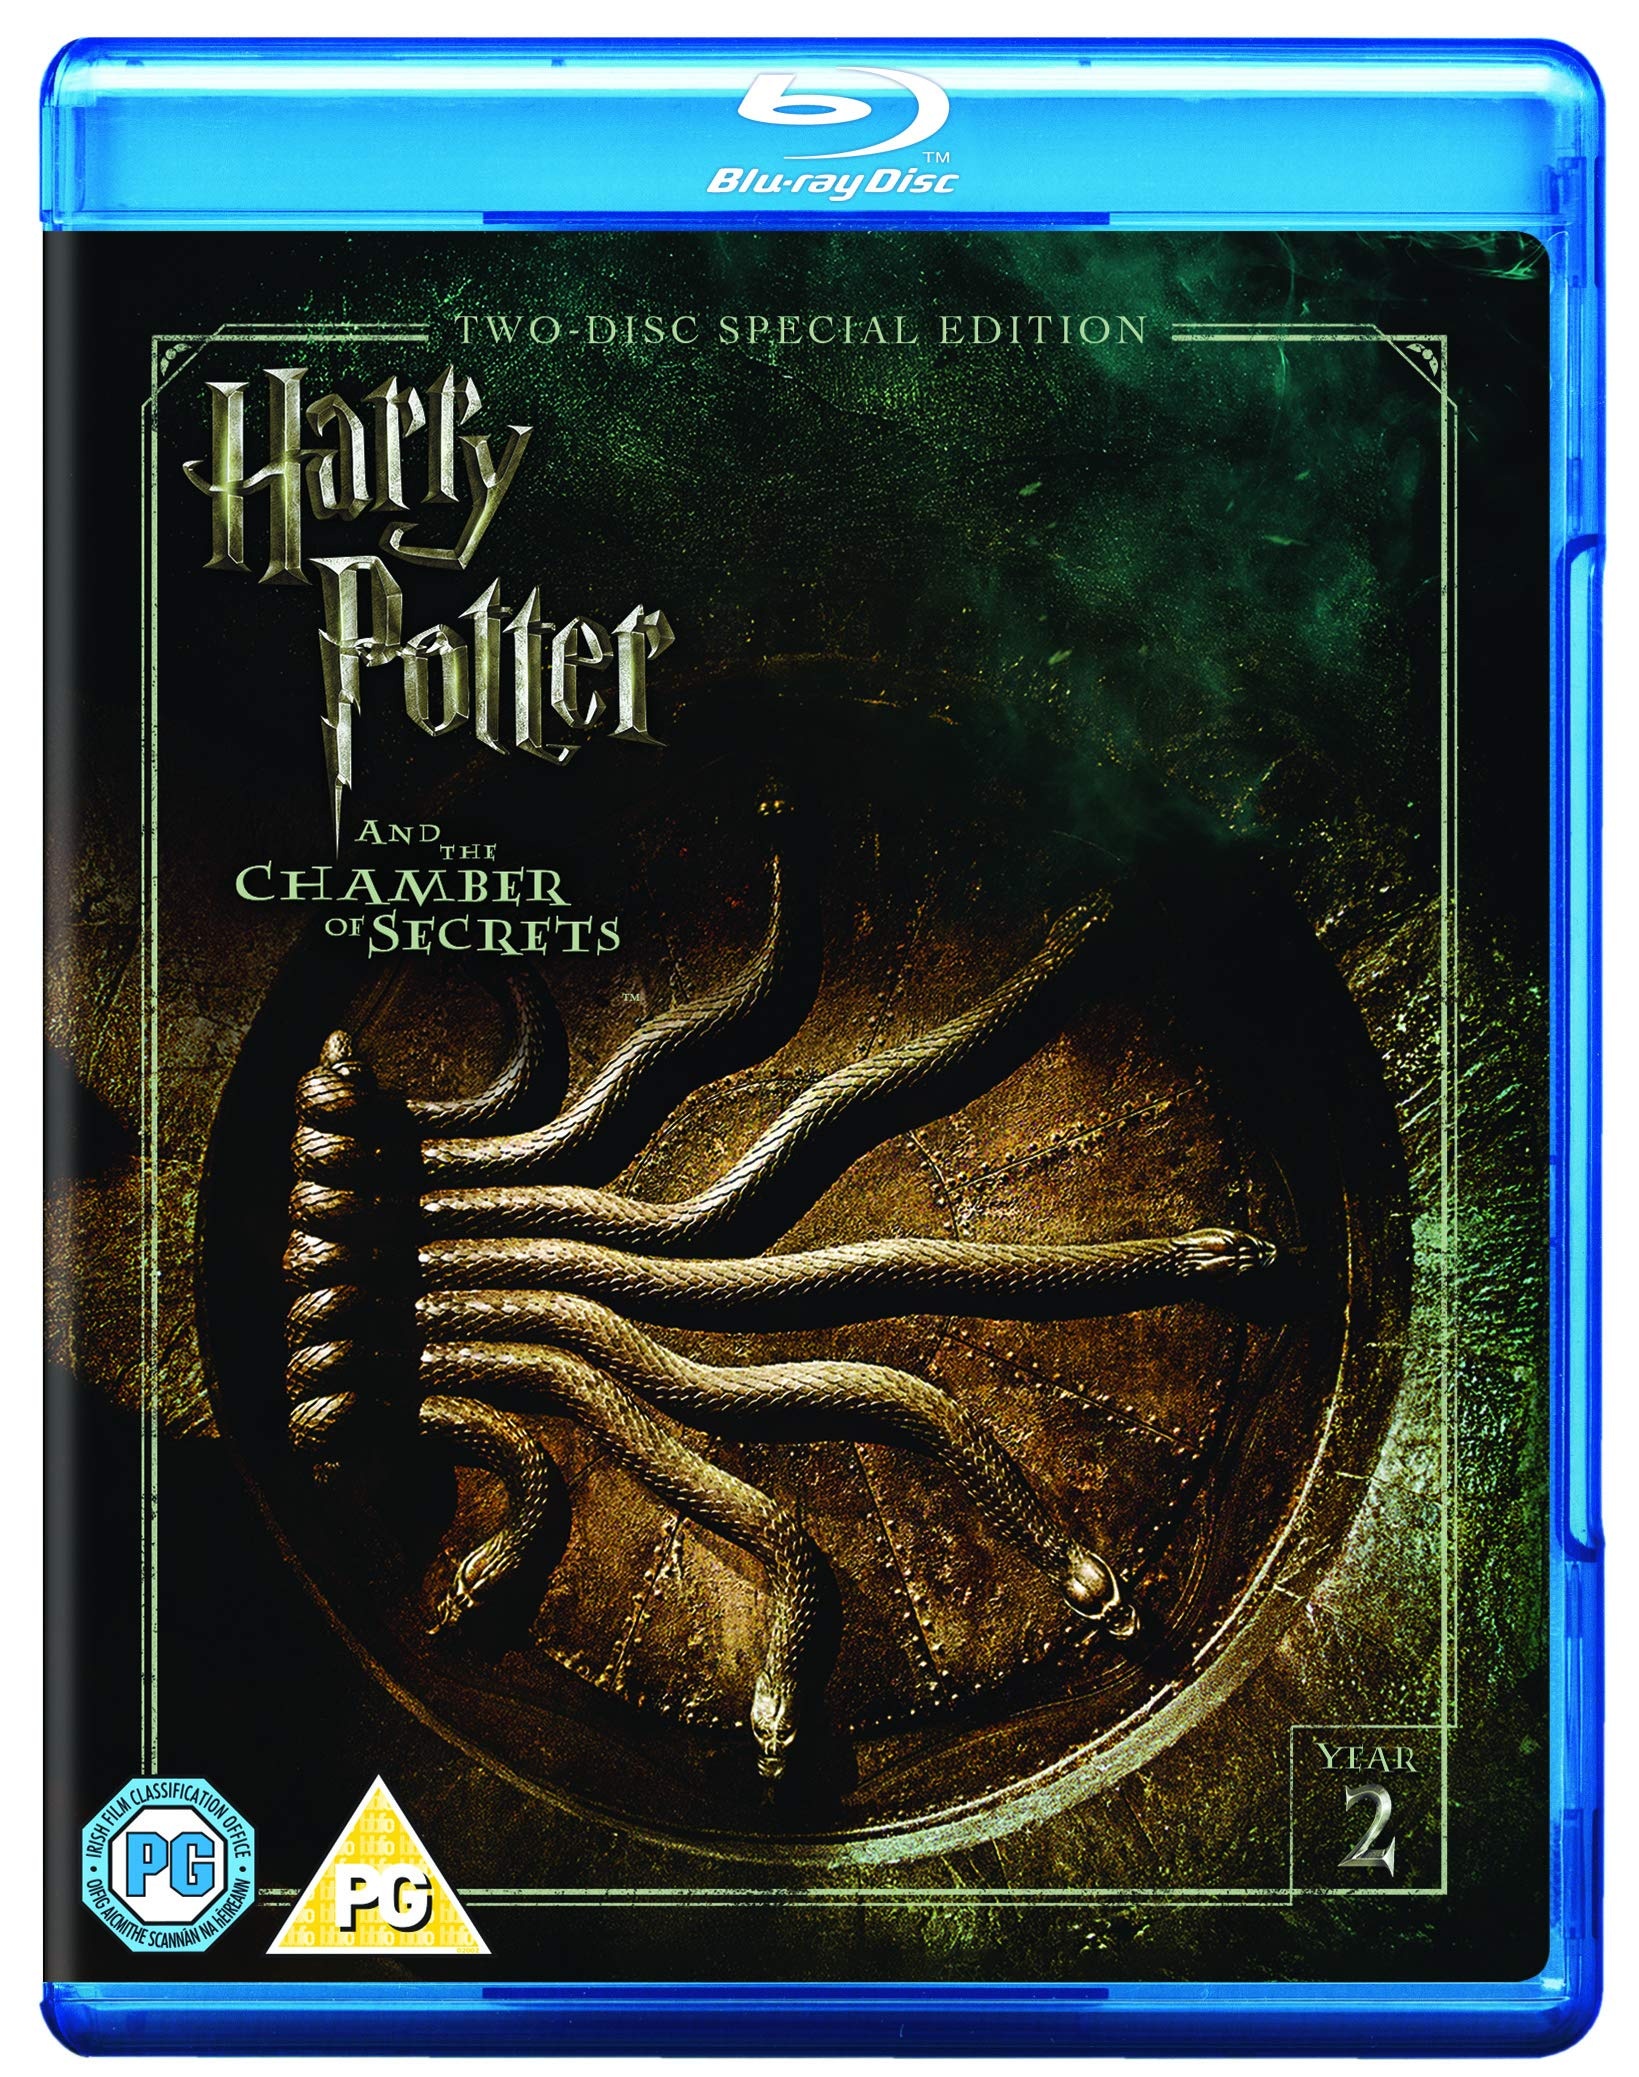 Harry Potter And The Chamber Of Secrets [Blu-ray] [UK Import]